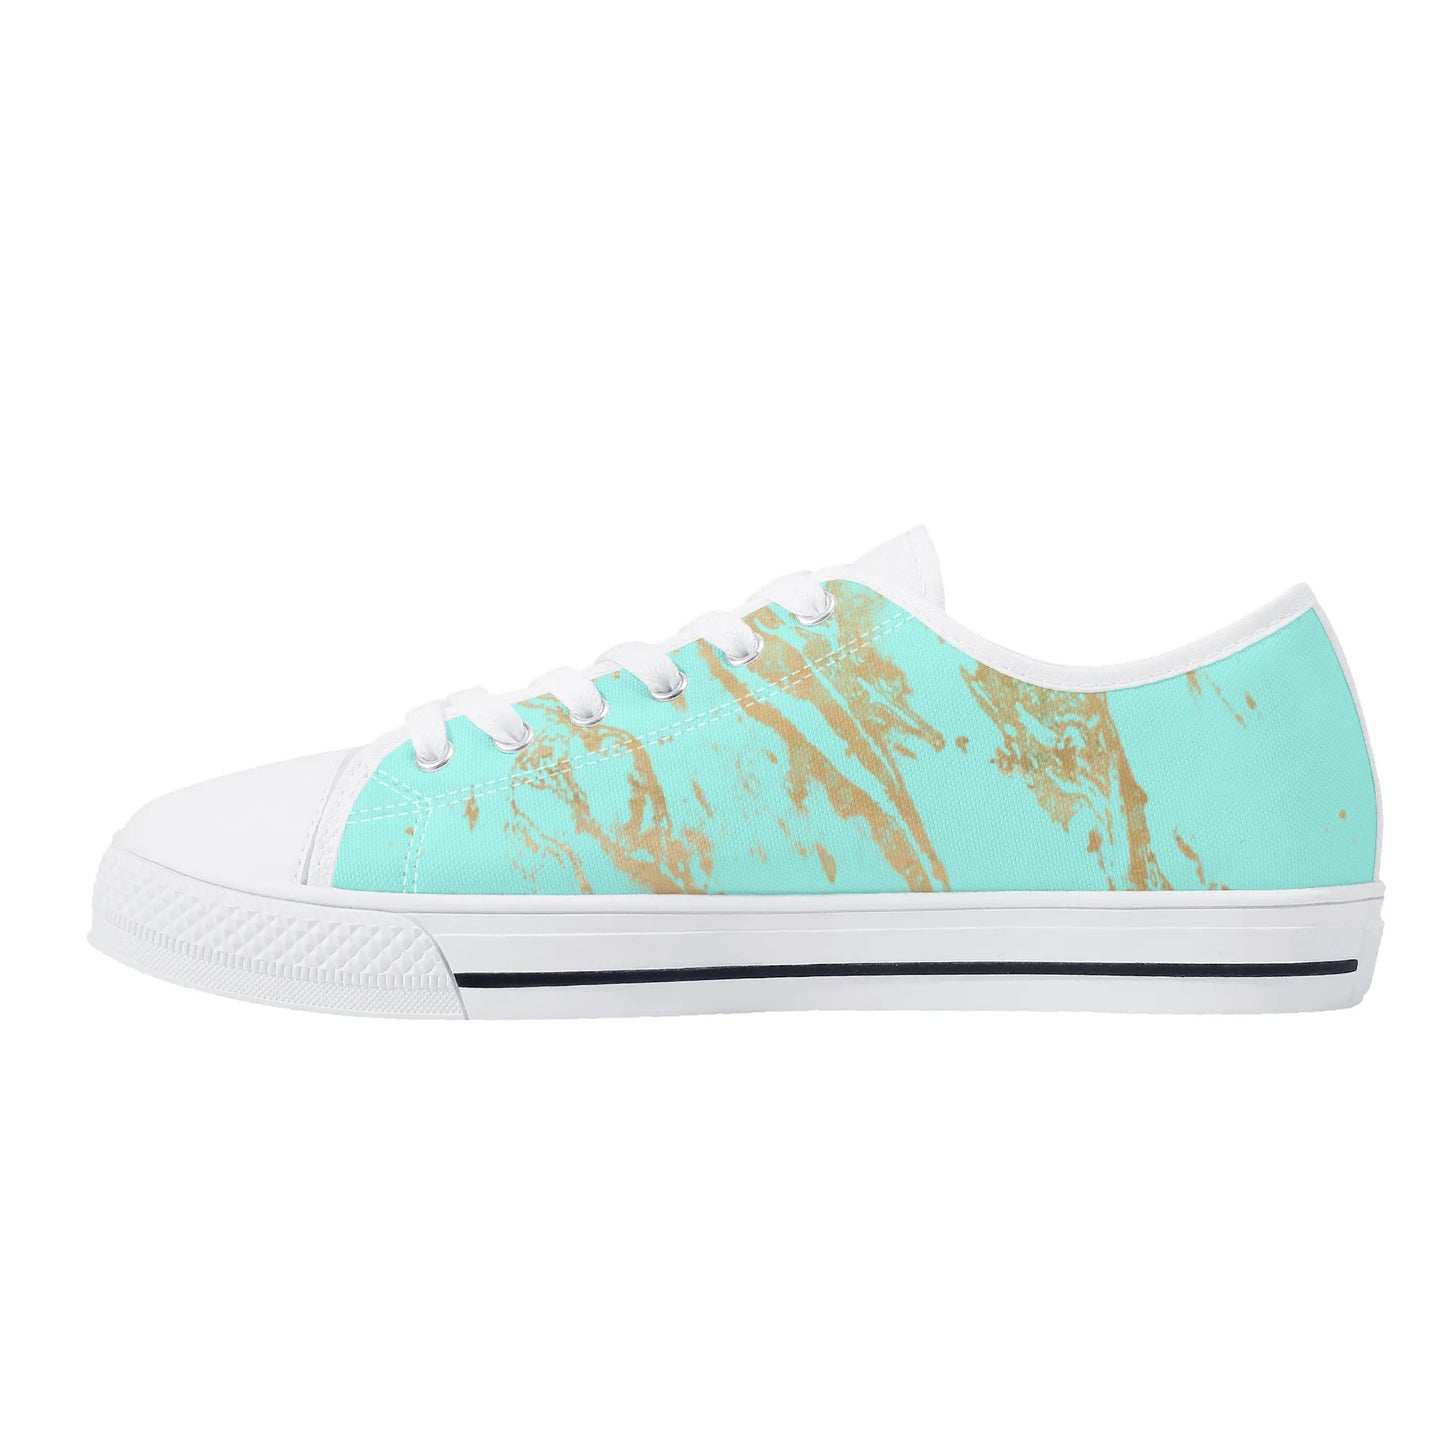 Women's DuGamii Clear Water Blue Rubber Low Top Canvas Shoes